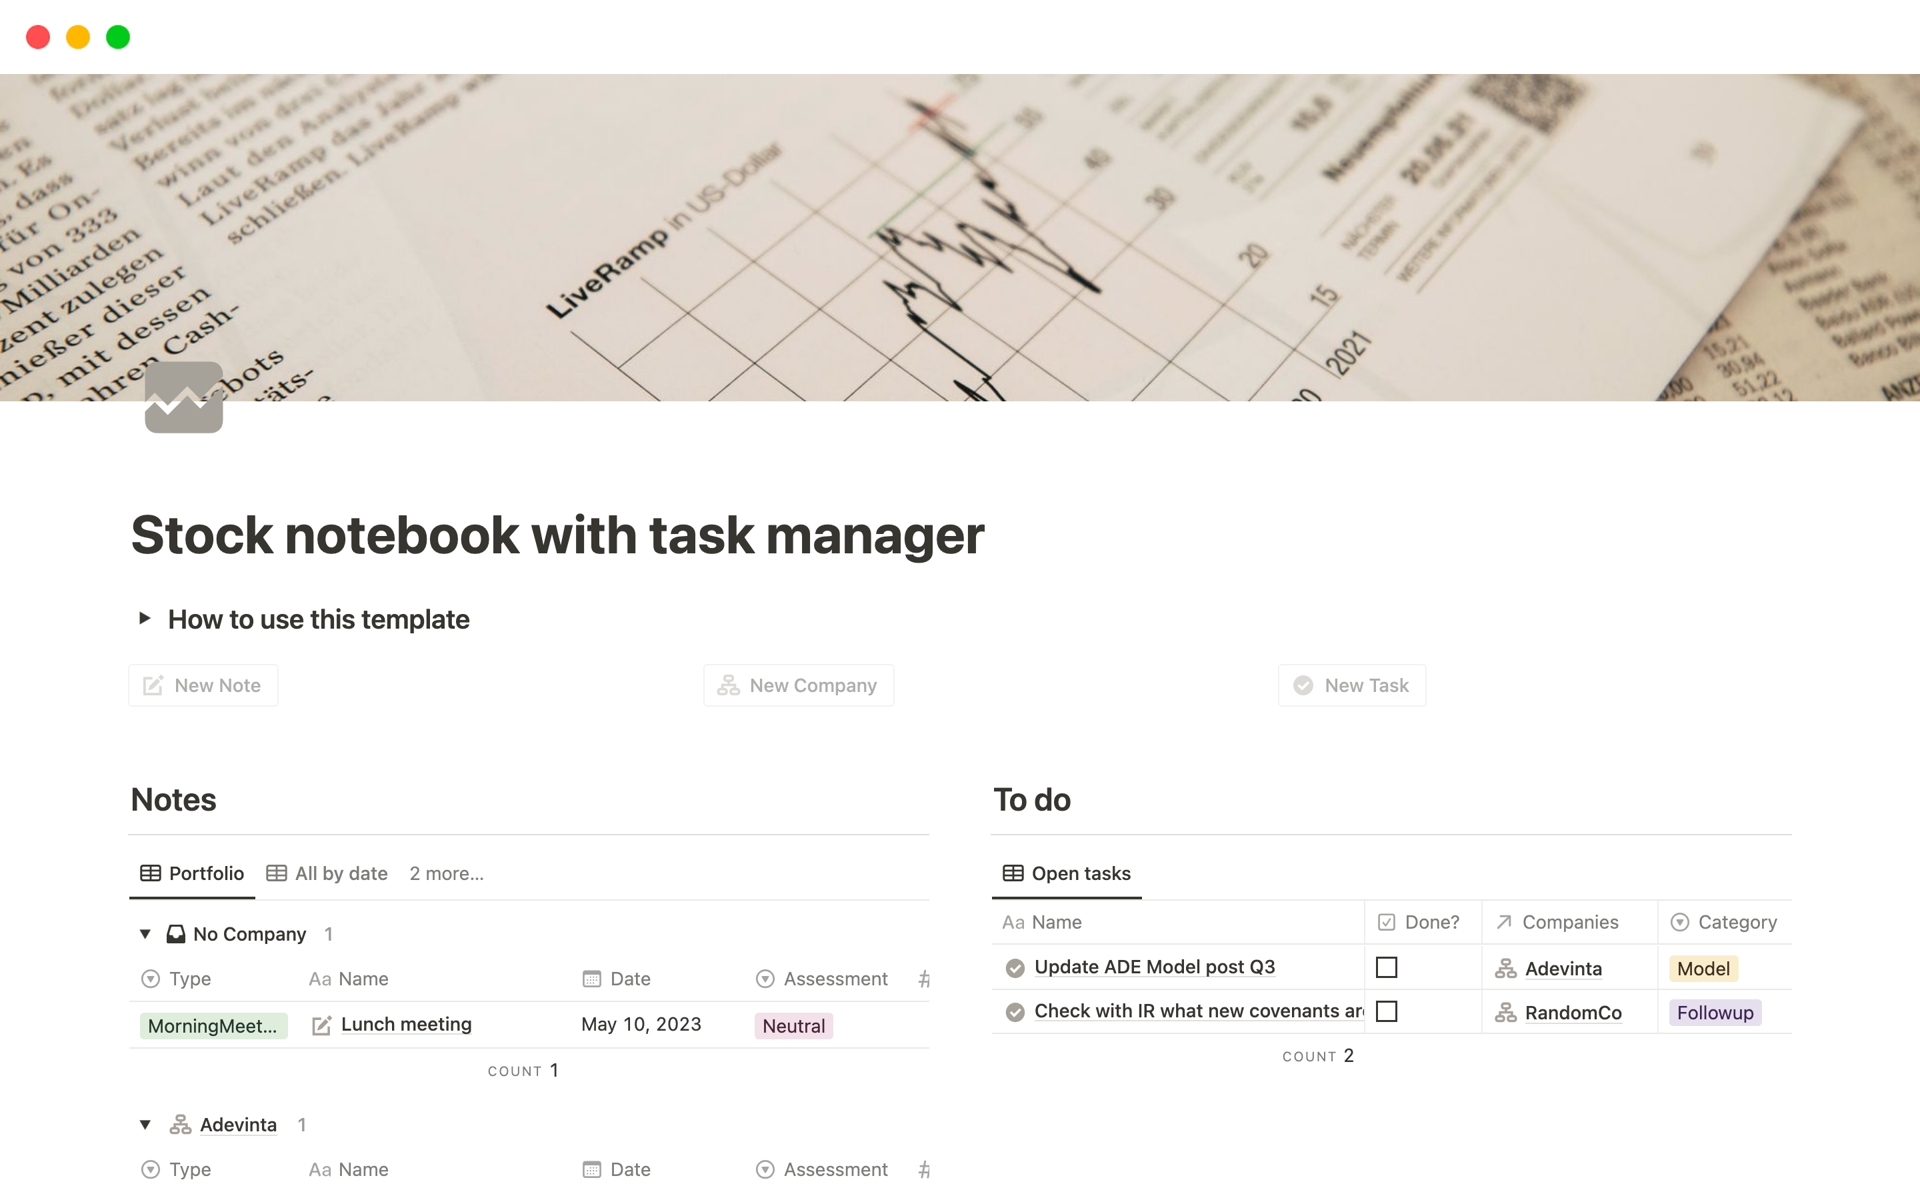 Stock notebook with task managerのテンプレートのプレビュー